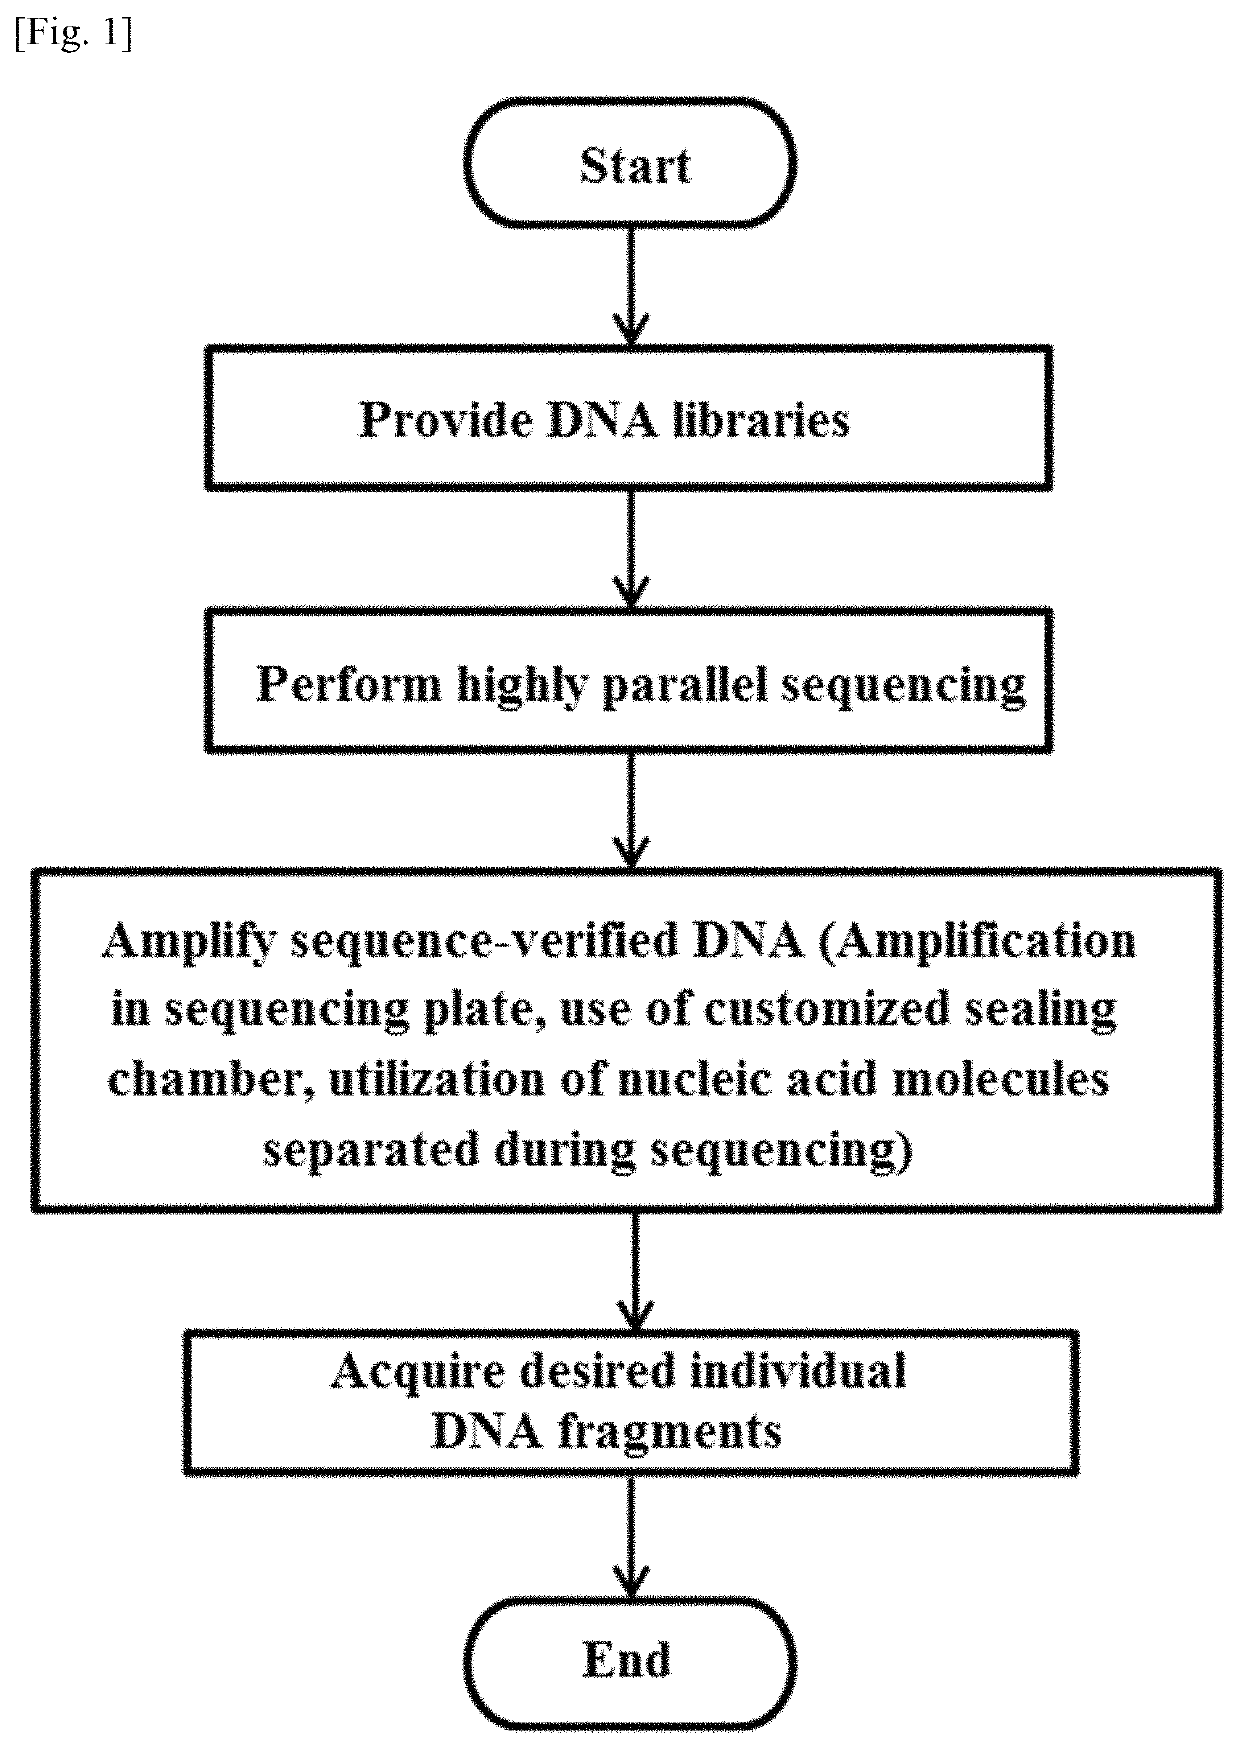 Methods for retrieving sequence-verified nucleic acid fragments and apparatuses for amplifying sequence verified nucleic acid fragments